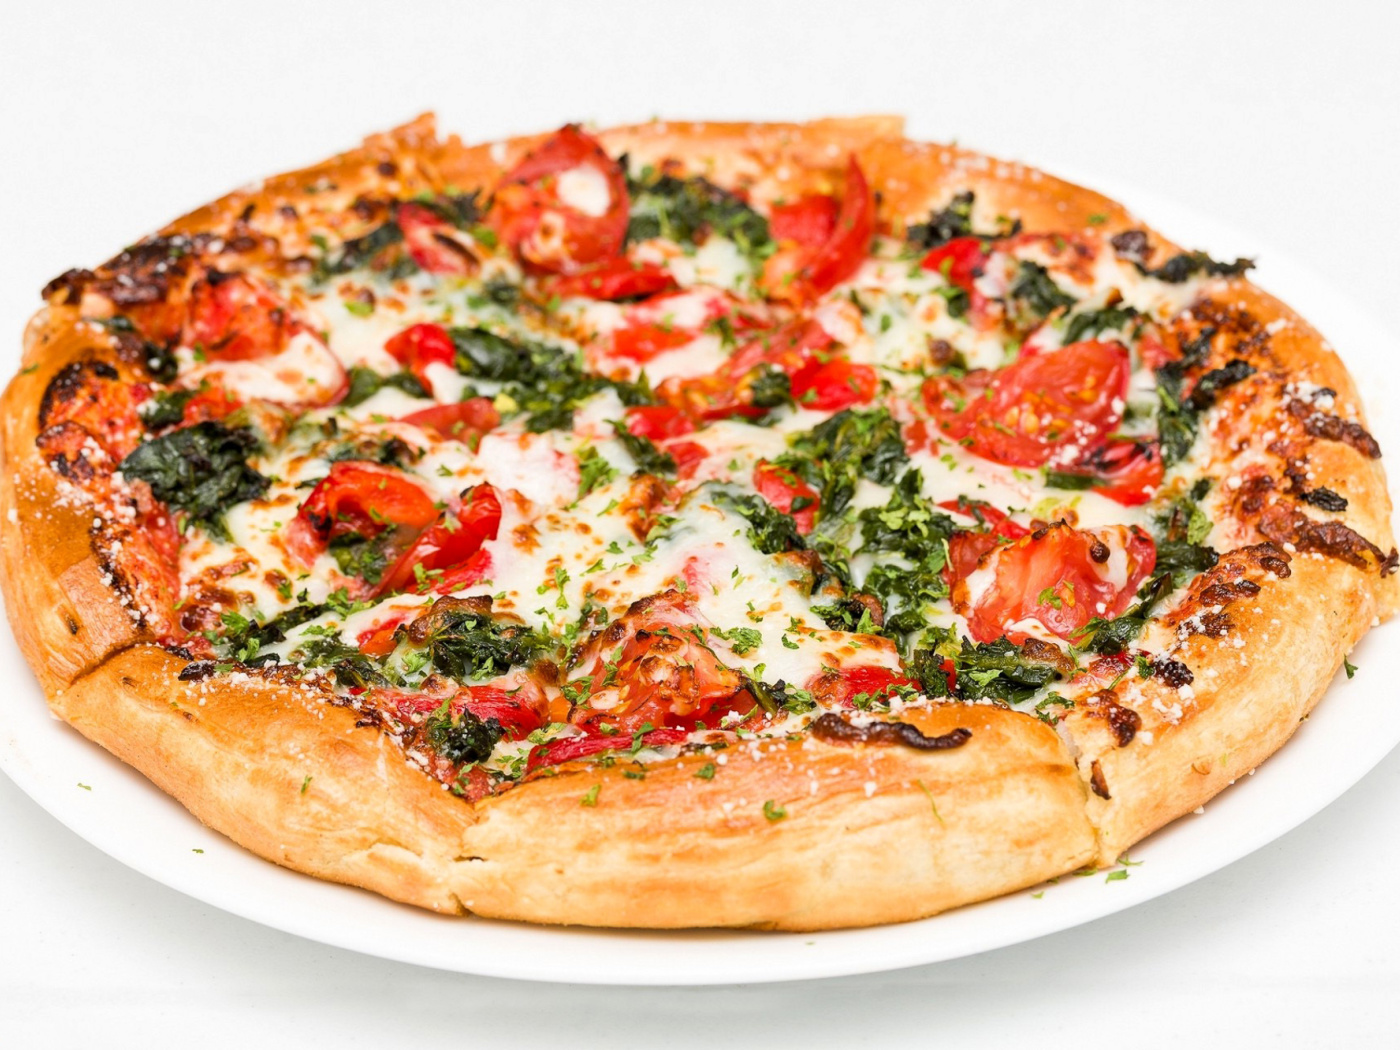 Pizza with spinach screenshot #1 1400x1050